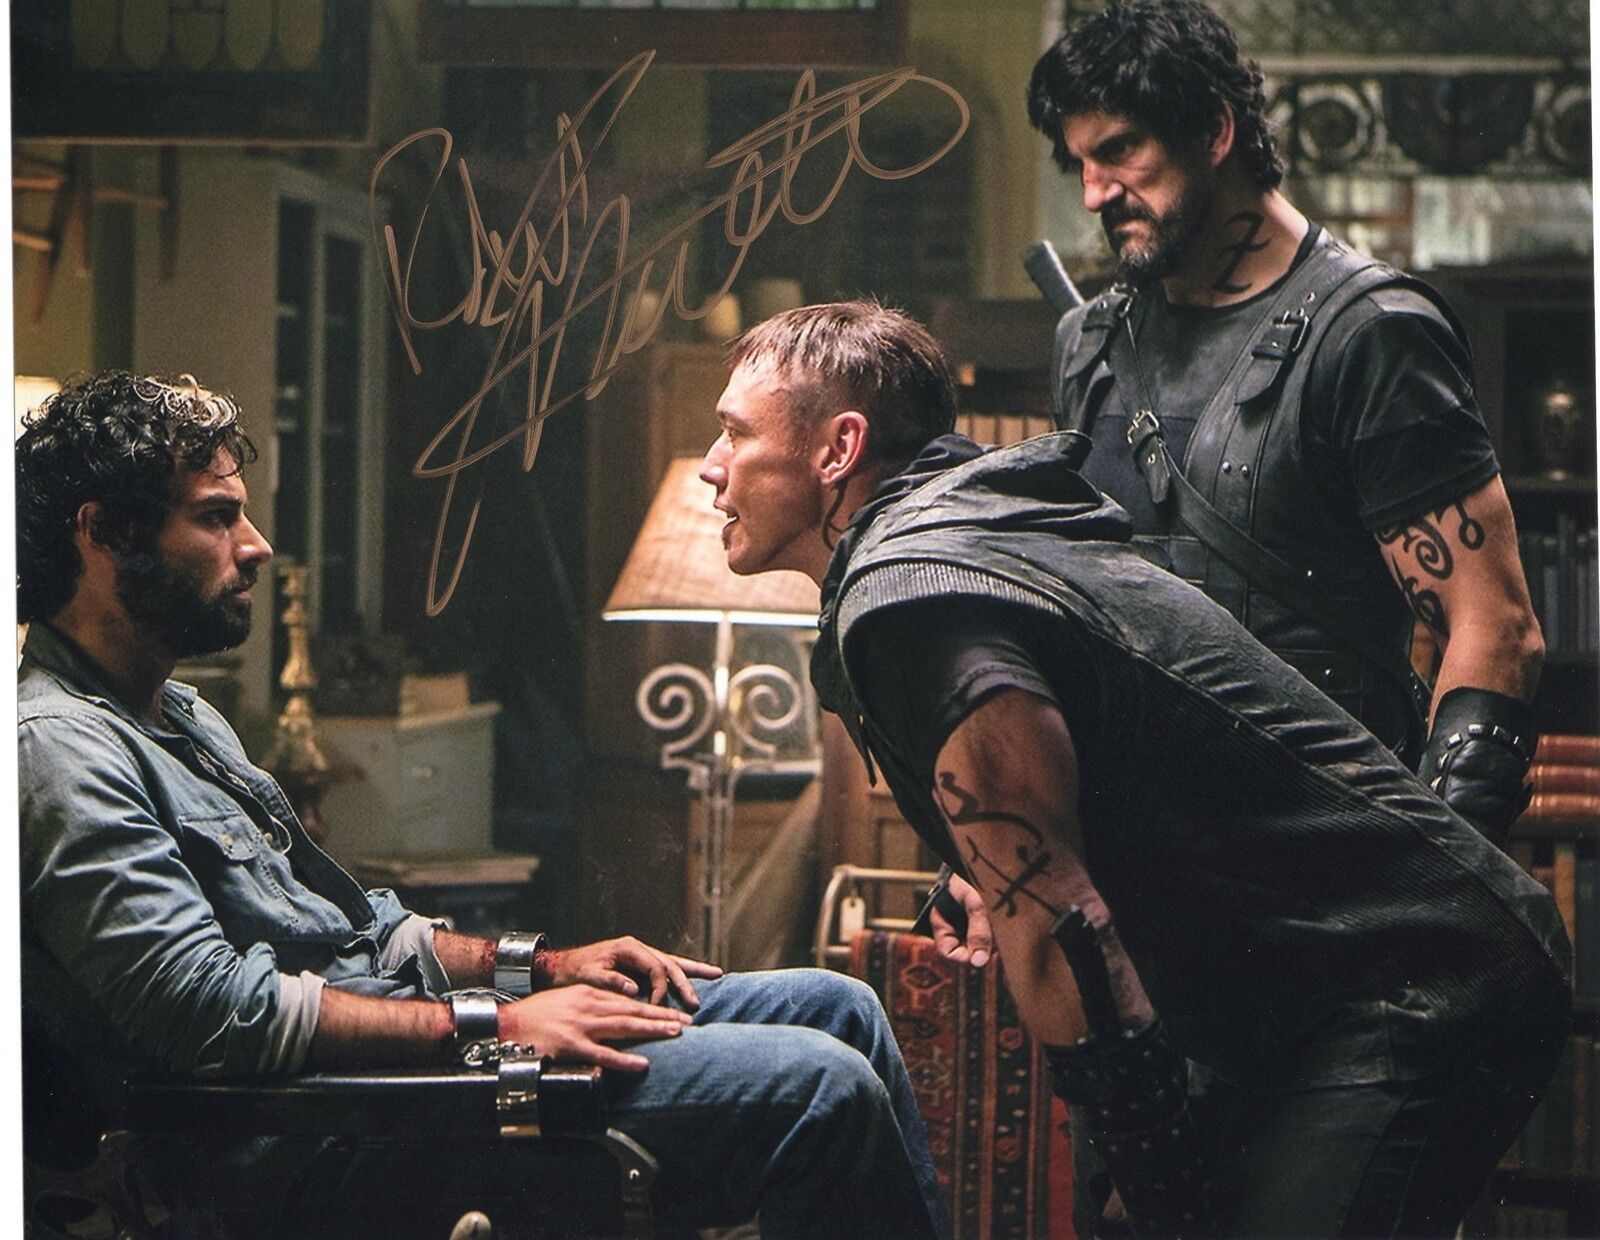 Robert Maillet The Mortal Instruments Signed 8x10 Photo Poster painting w/COA